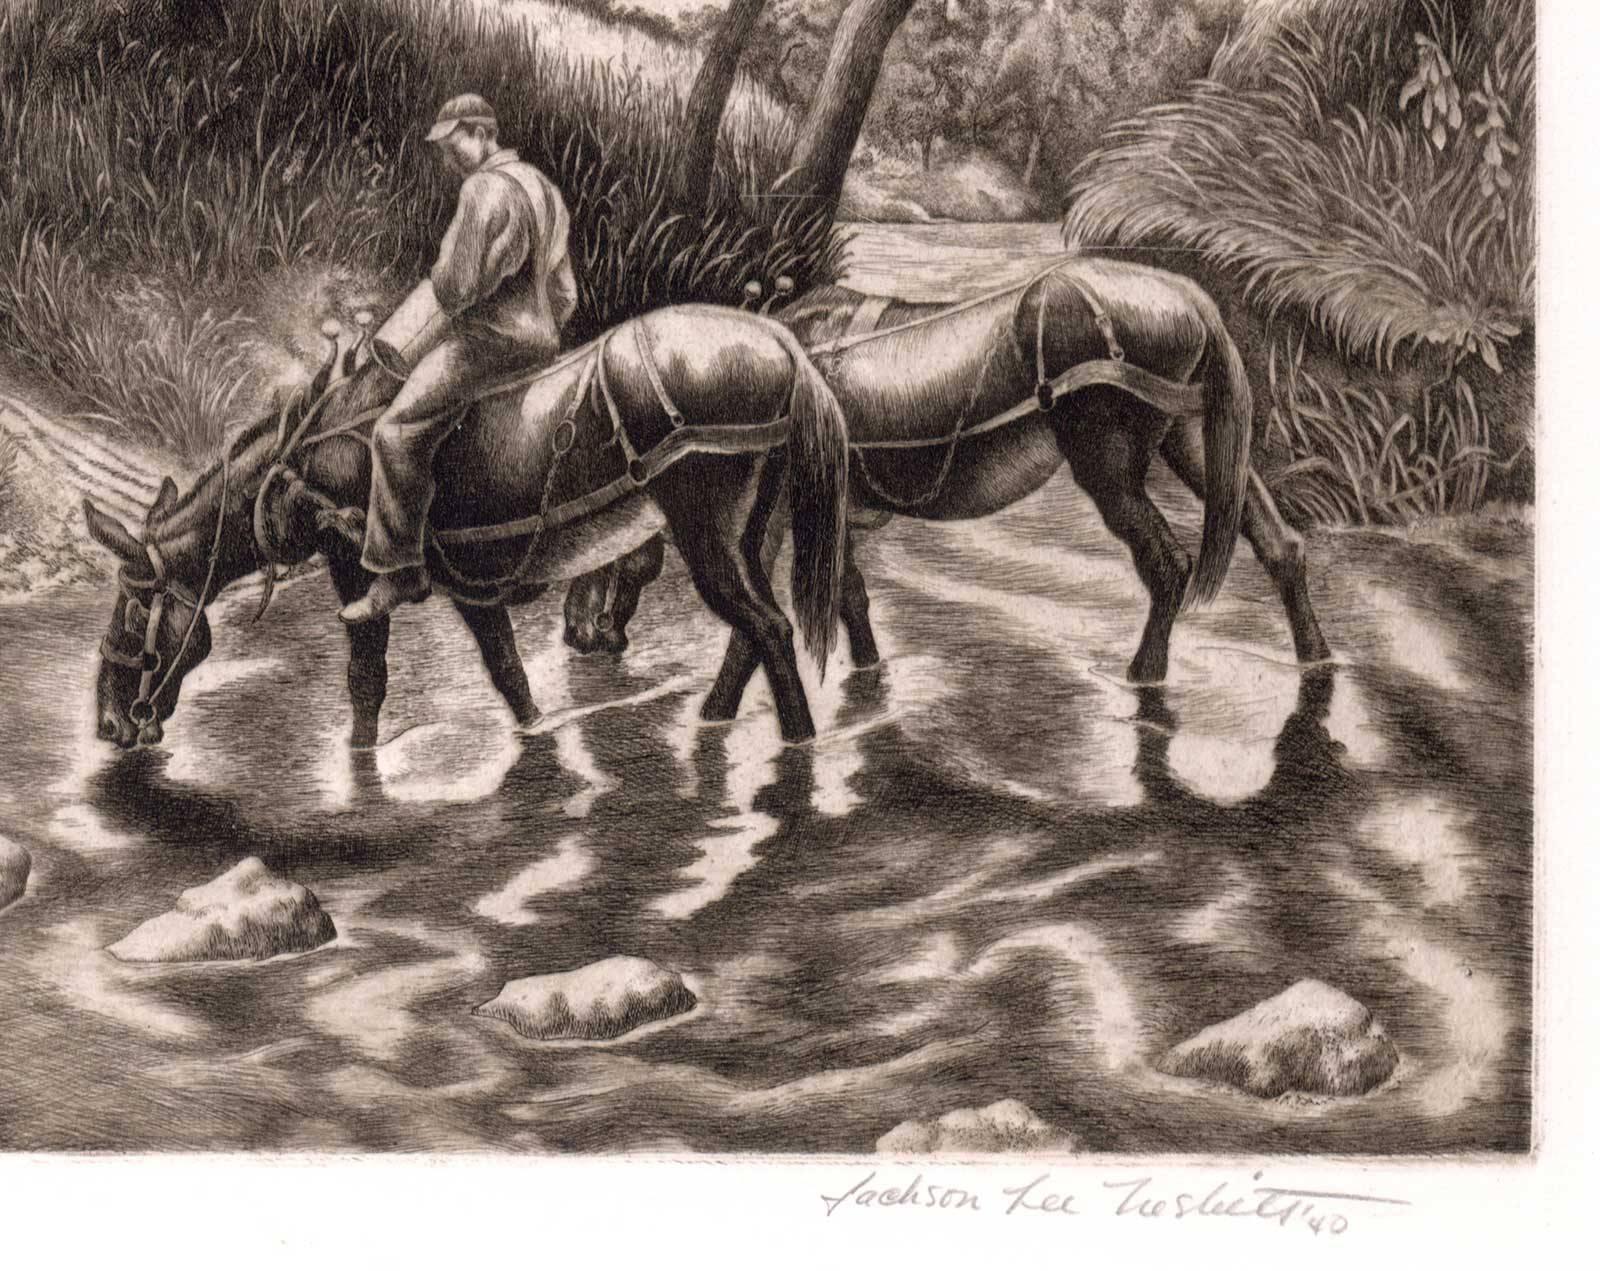 Watering Place (Scene was drawn while fishing along Illinois River in Oklahoma) - Print by Jackson Lee Nesbitt